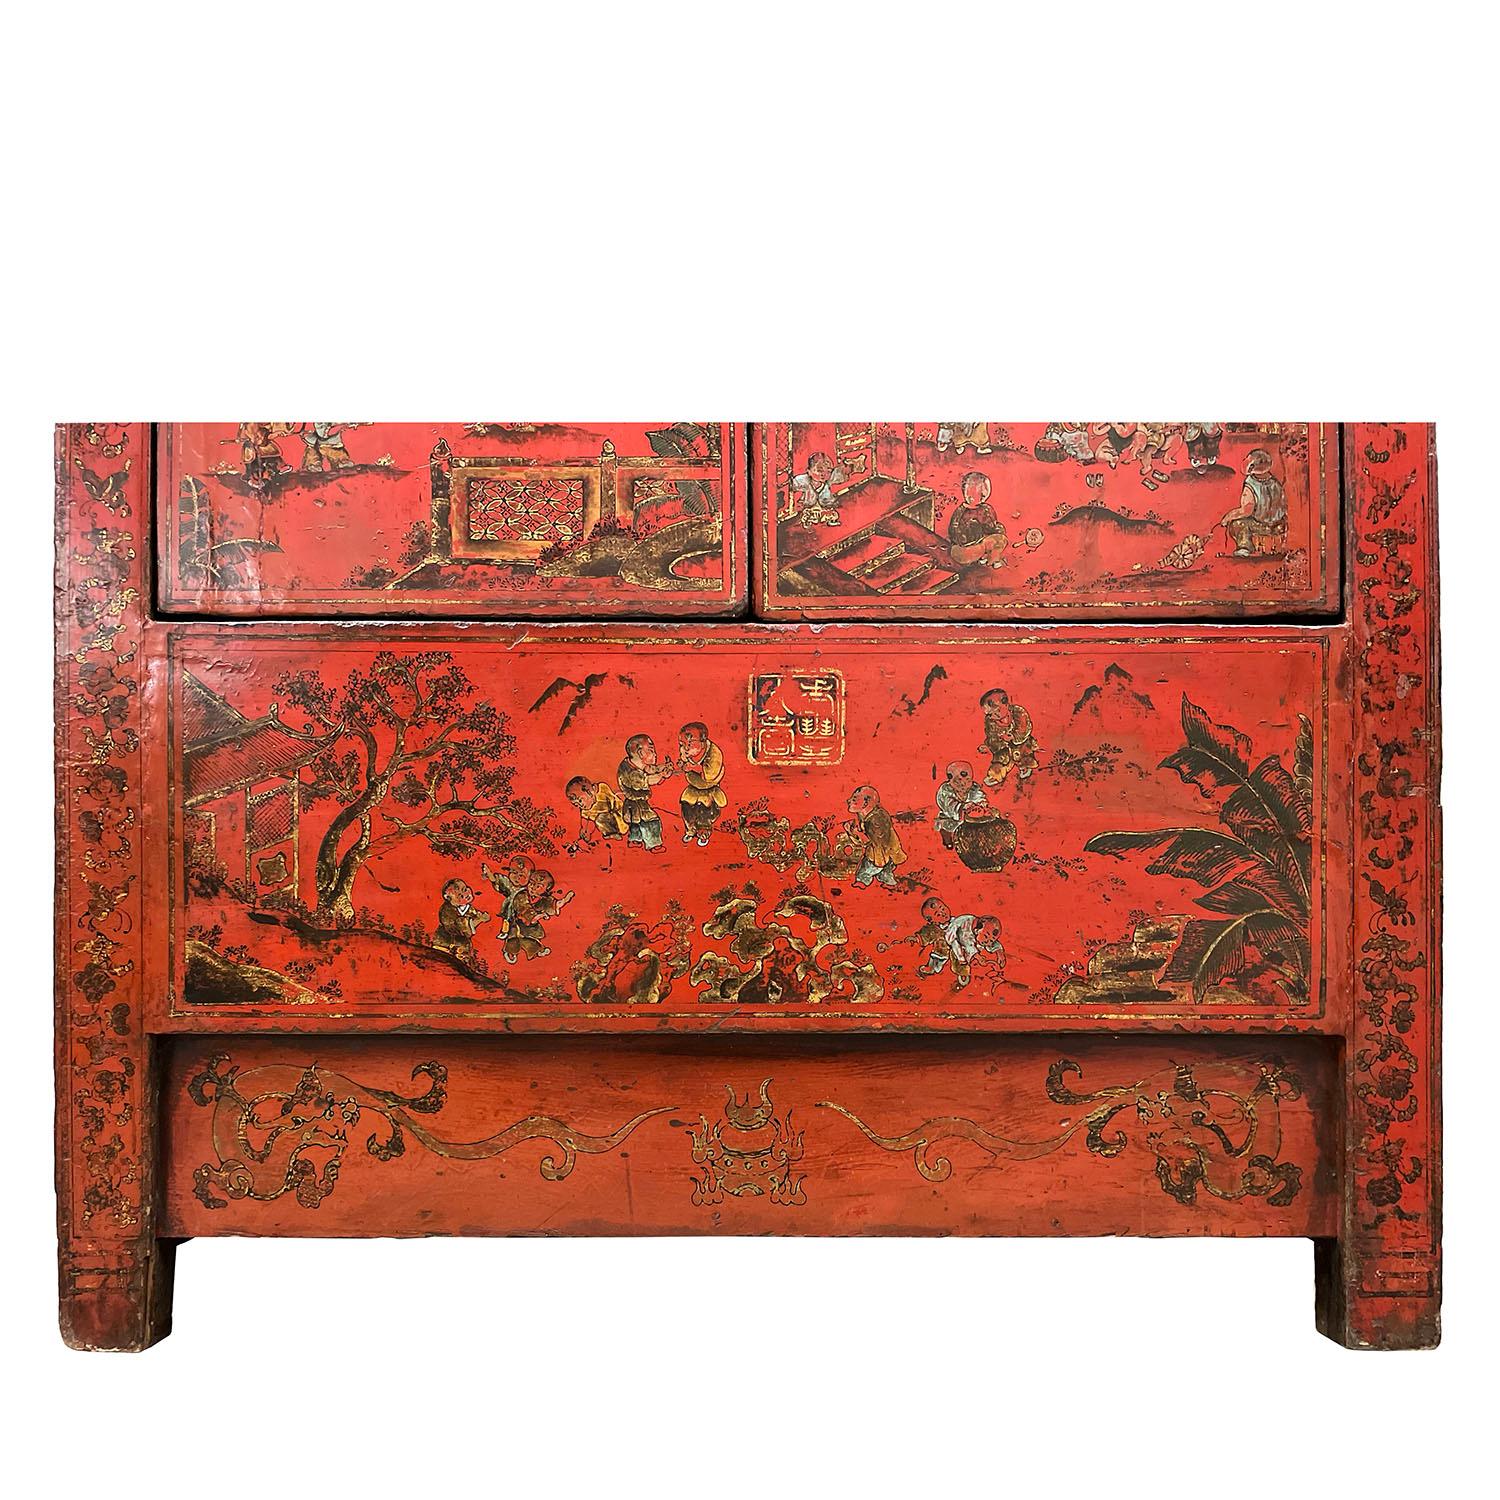 Antique Chinese Red Lacquered Wedding Armoire, Wardrobe With 100s Kids For Sale 3